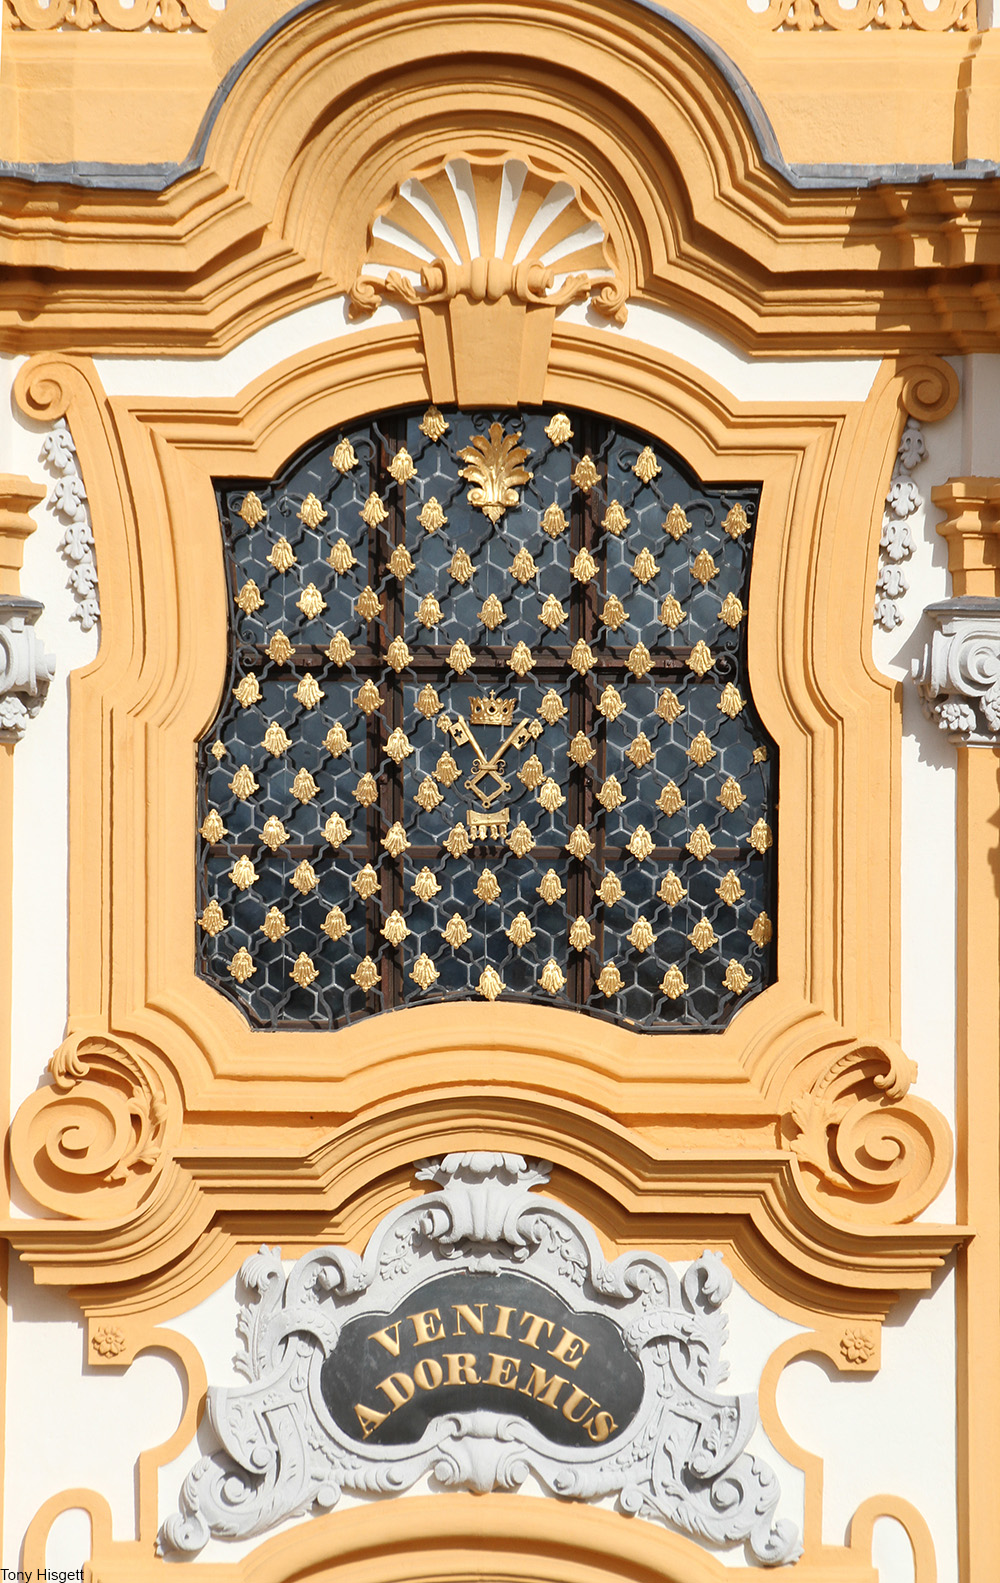 gilt sign at Melk Abbey that reads "let us worship the lord"